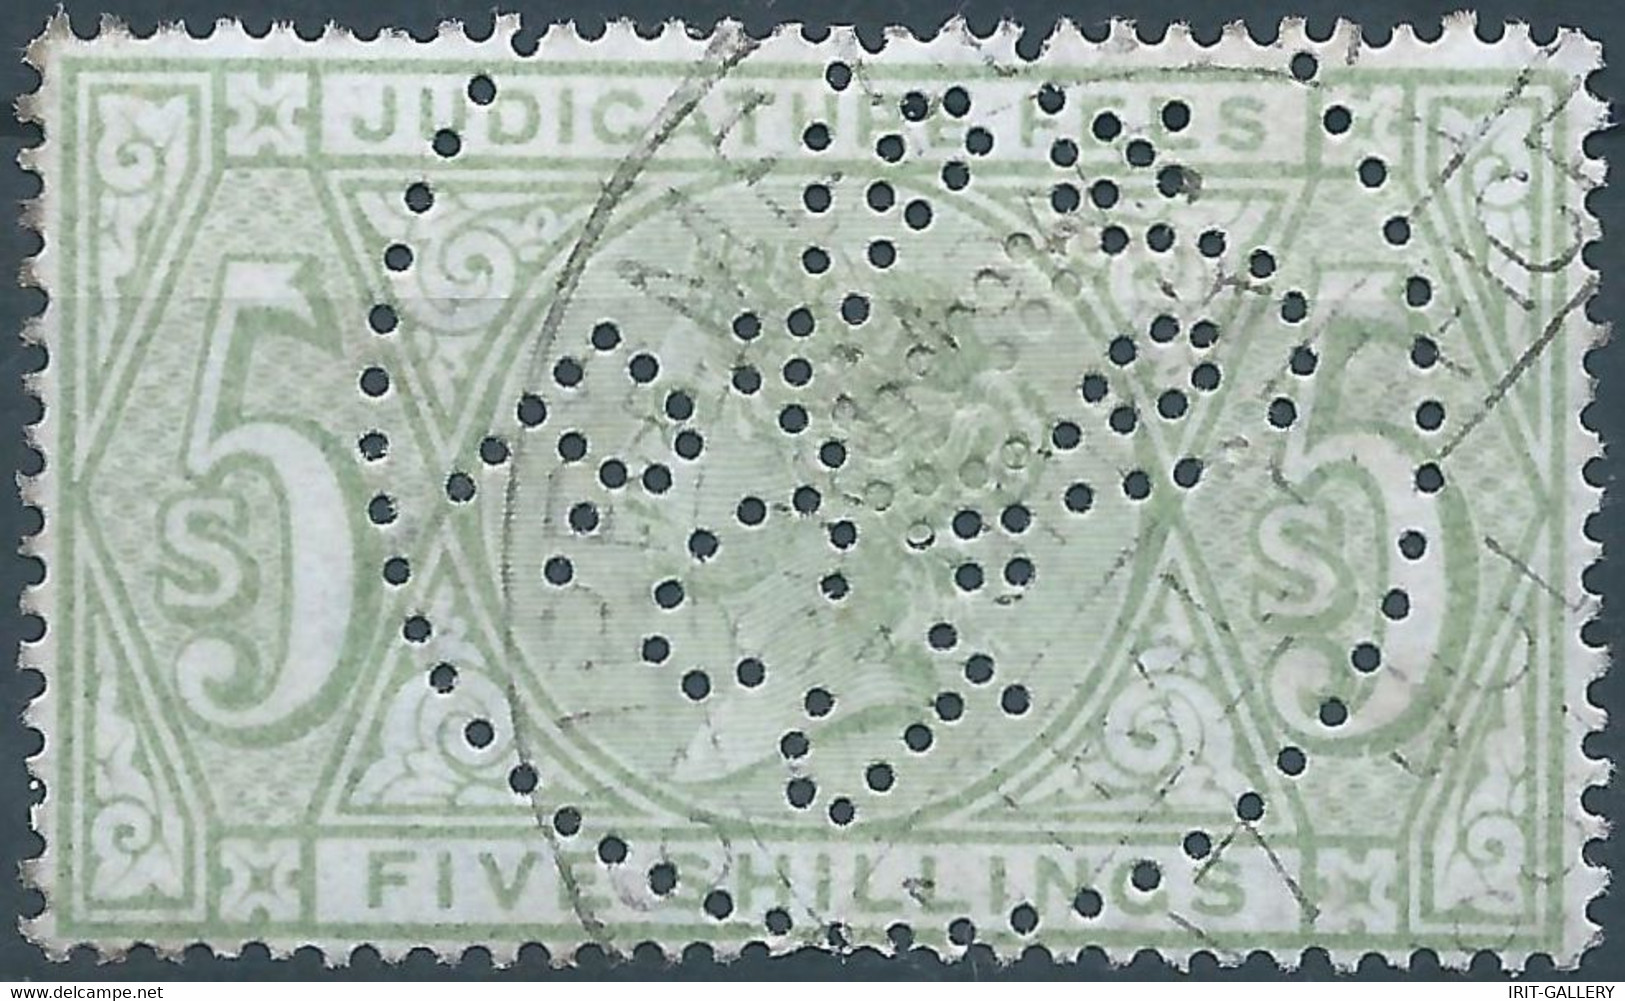 Great Britain-ENGLAND,Queen Victoria,1870-1800 Revenue Stamp Tax Fiscal,JUDICATURE FEES,5 Shillings,PERFIN - Used - Revenue Stamps